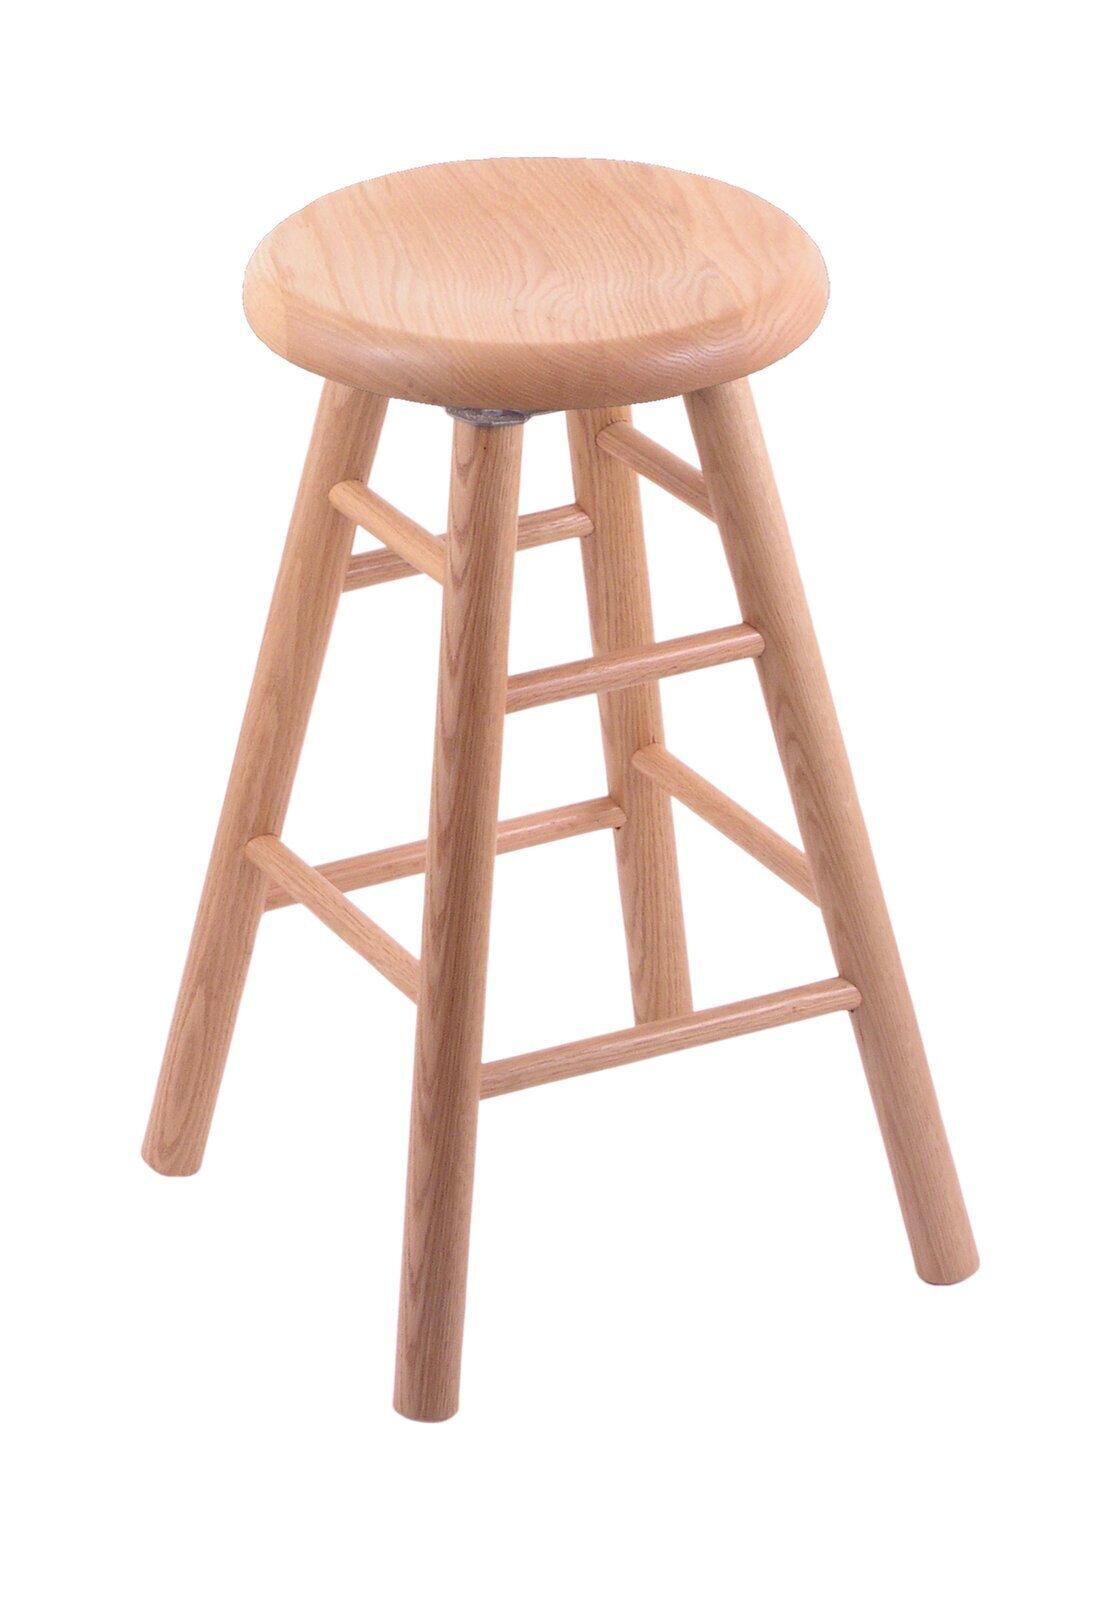 Wooden bar stools 36 inch seat height 